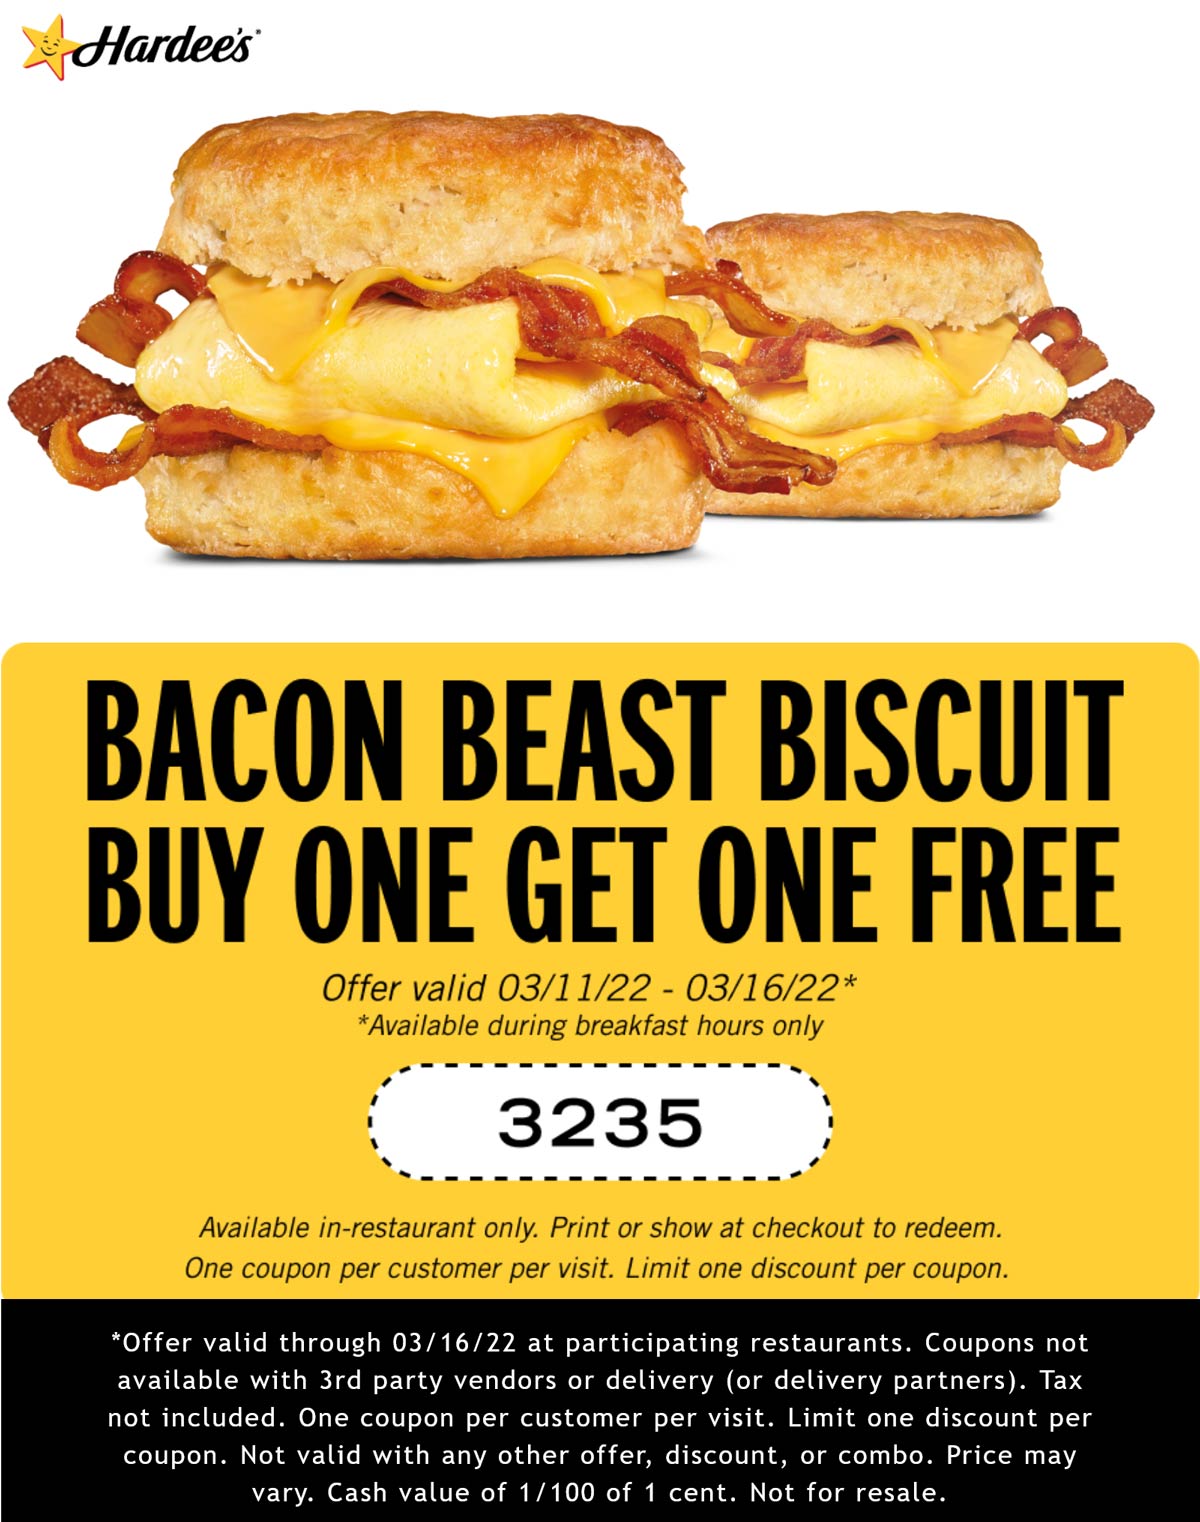 Hardees restaurants Coupon  Second bacon beast biscuit sandwich free at Hardees #hardees 